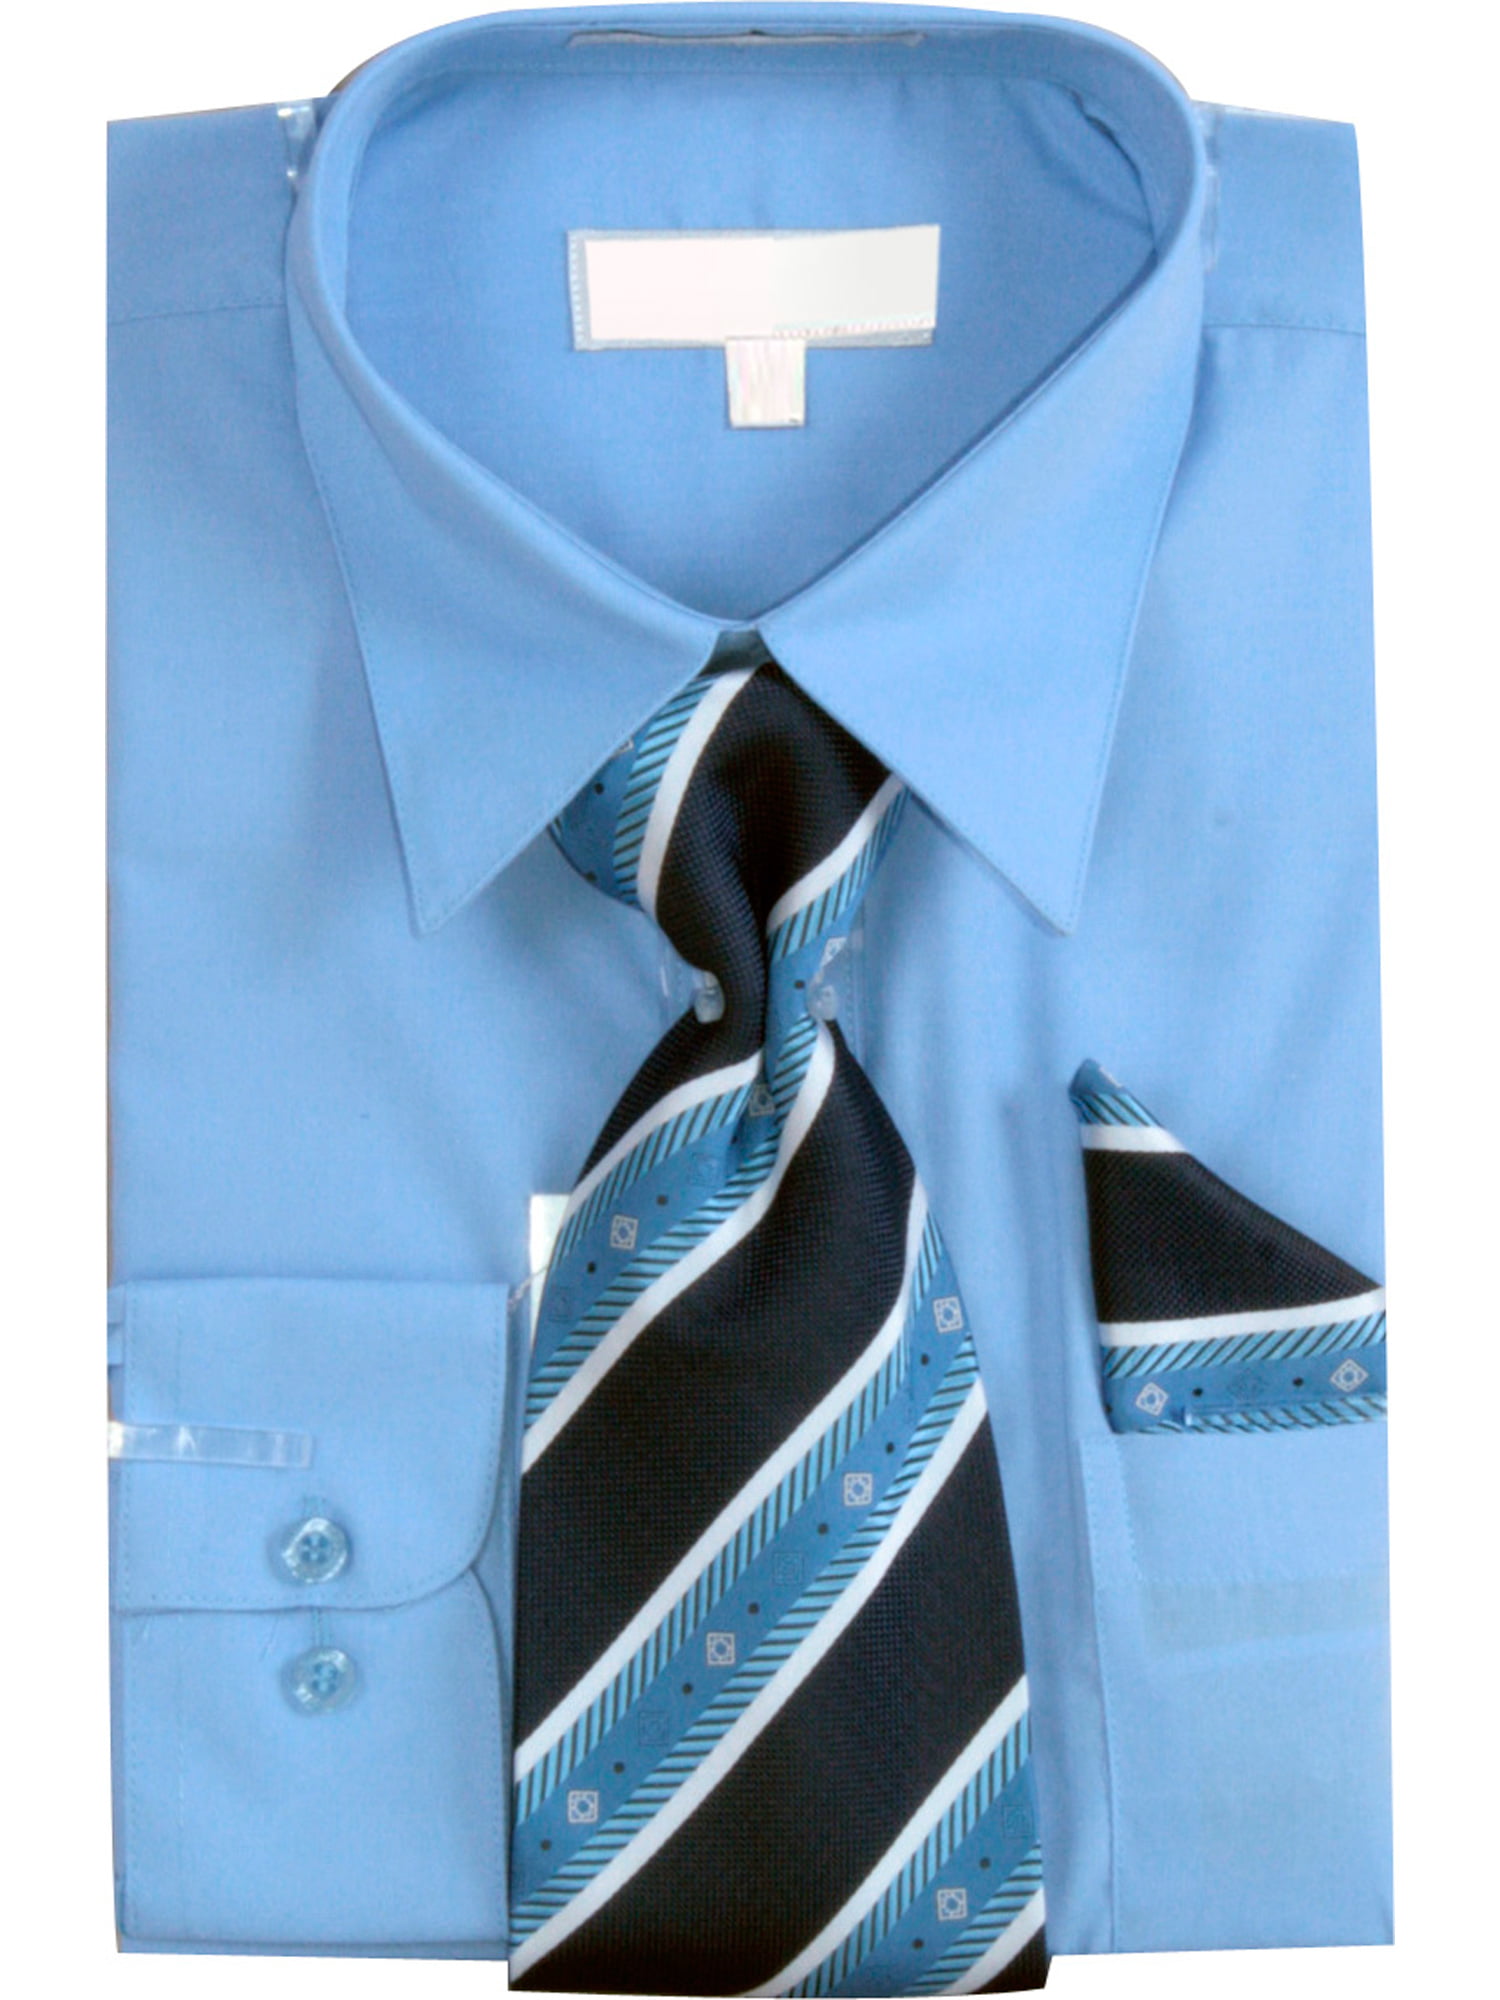 Sunrise Outlet Mens Basic Dress Shirt with a Varying Print Tie And Hanky Set 